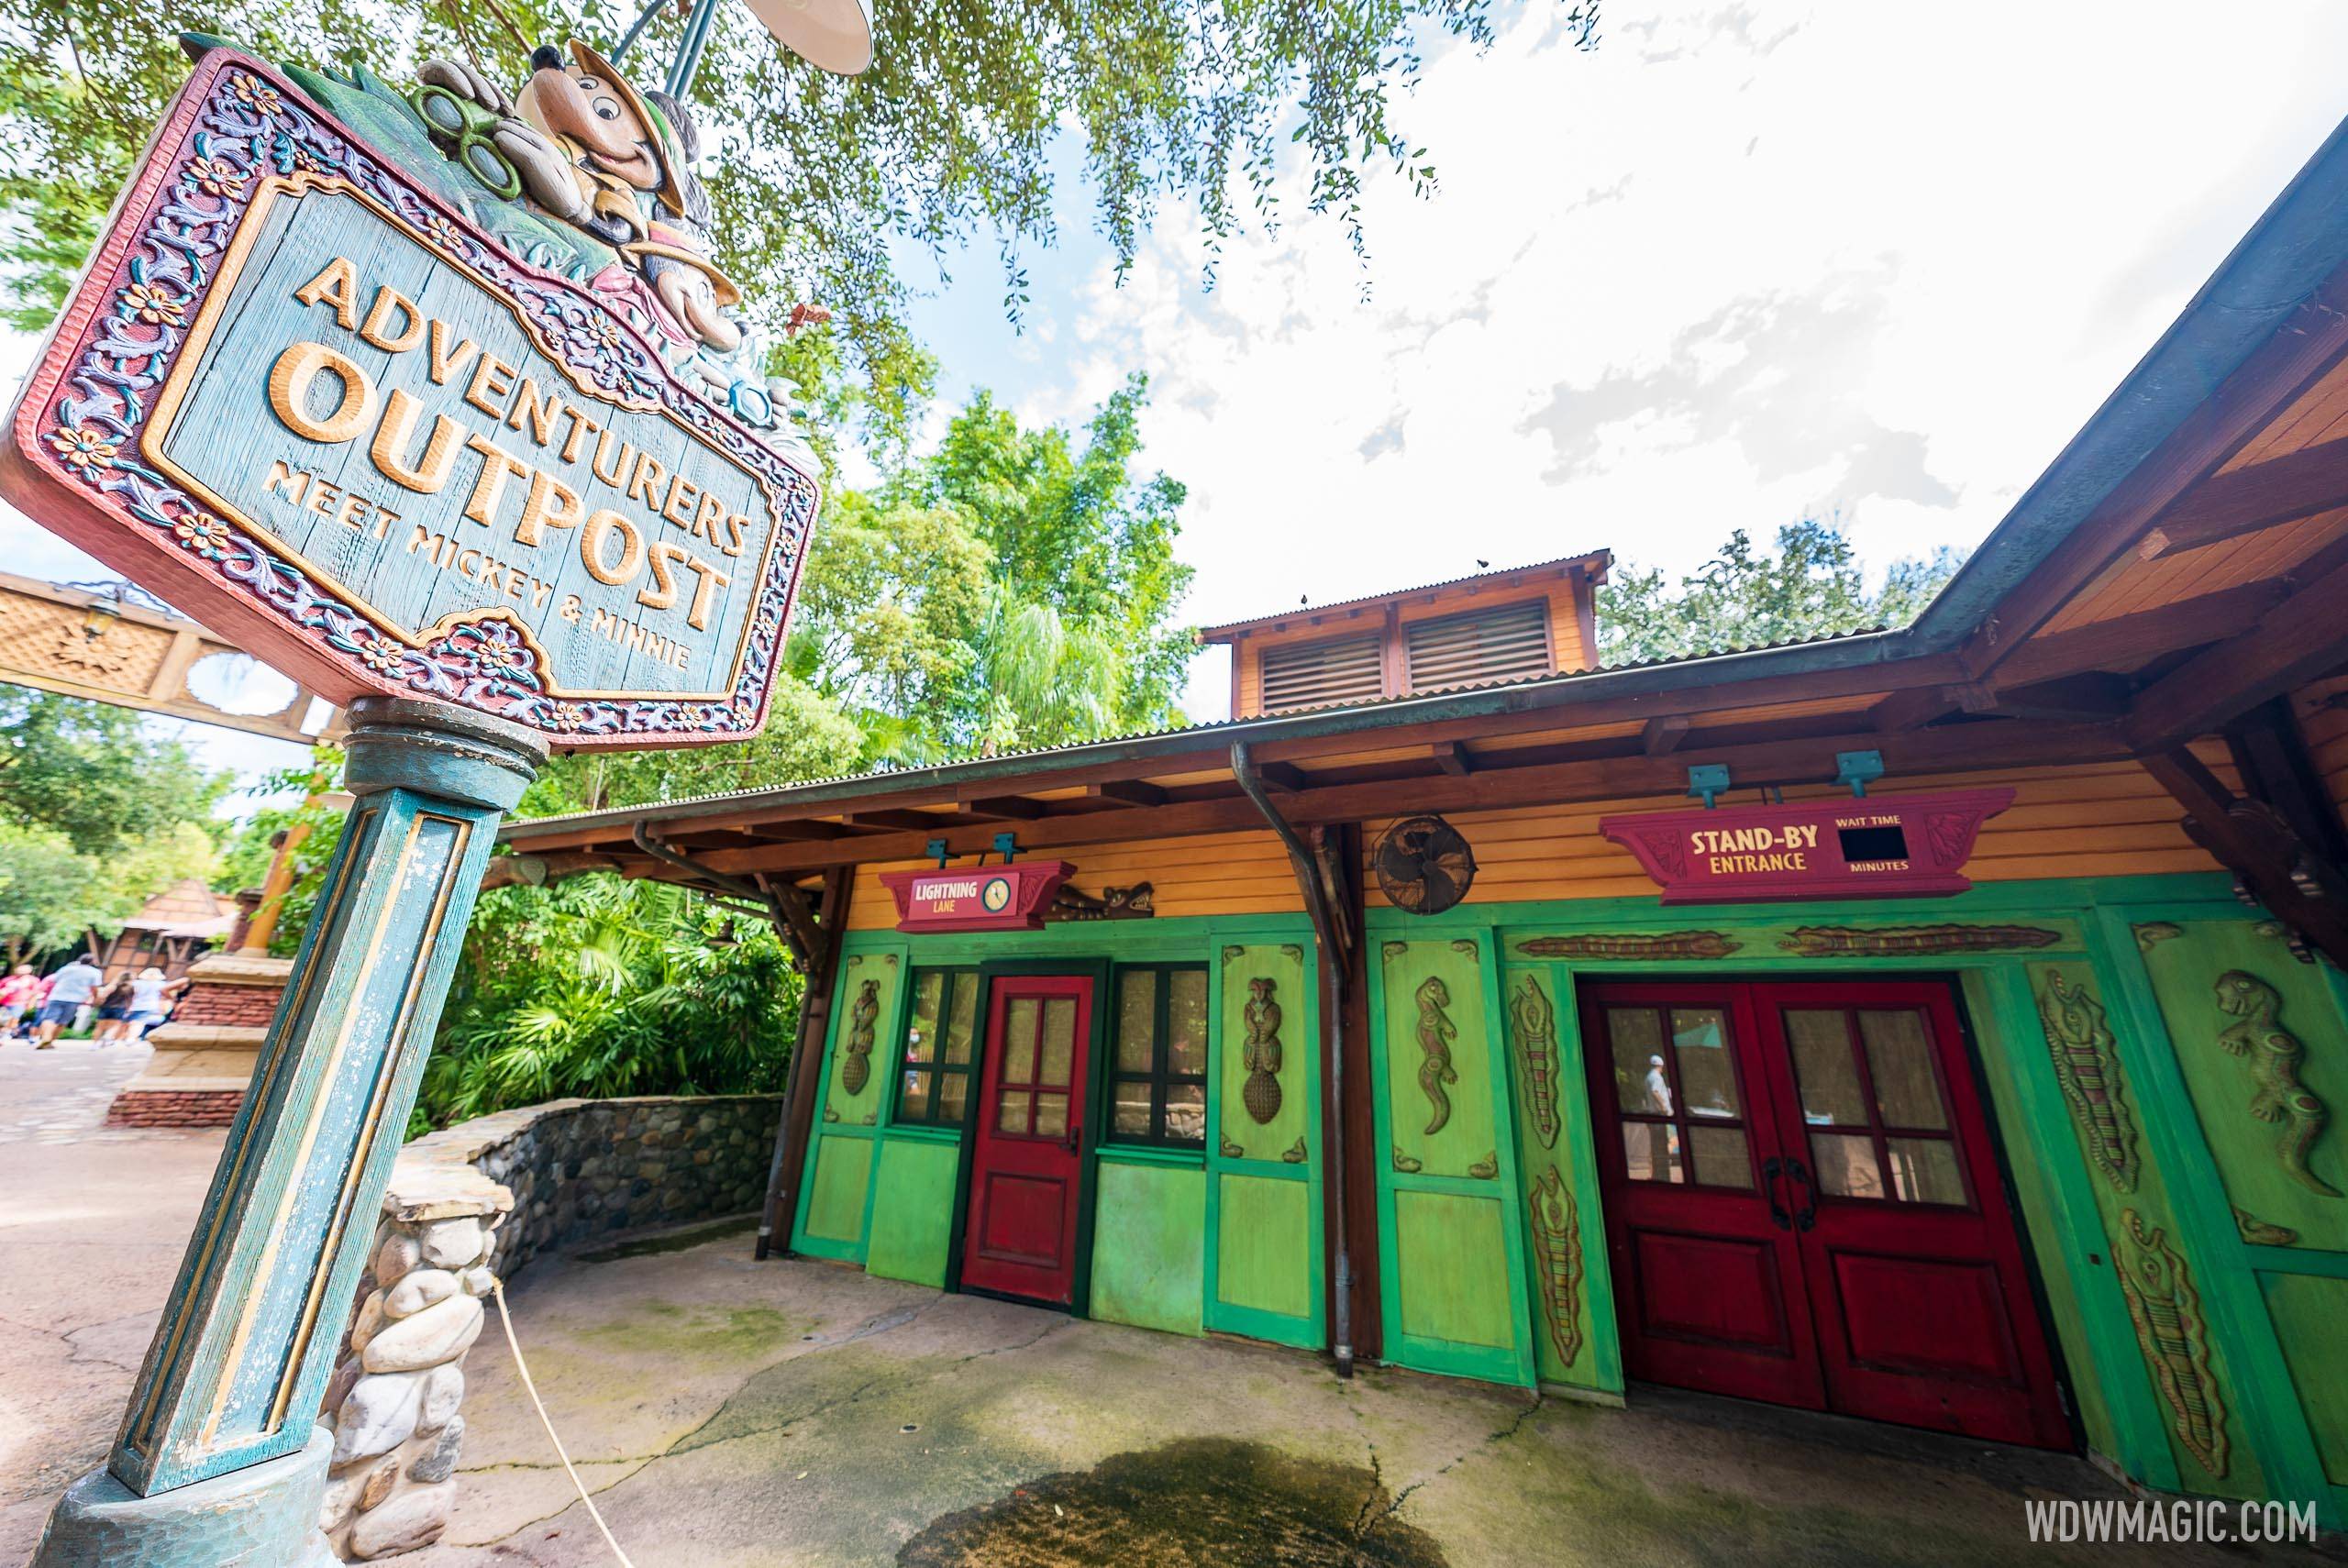 Reopening date set for Adventurer's Outpost character meet and greet at Disney's Animal Kingdom